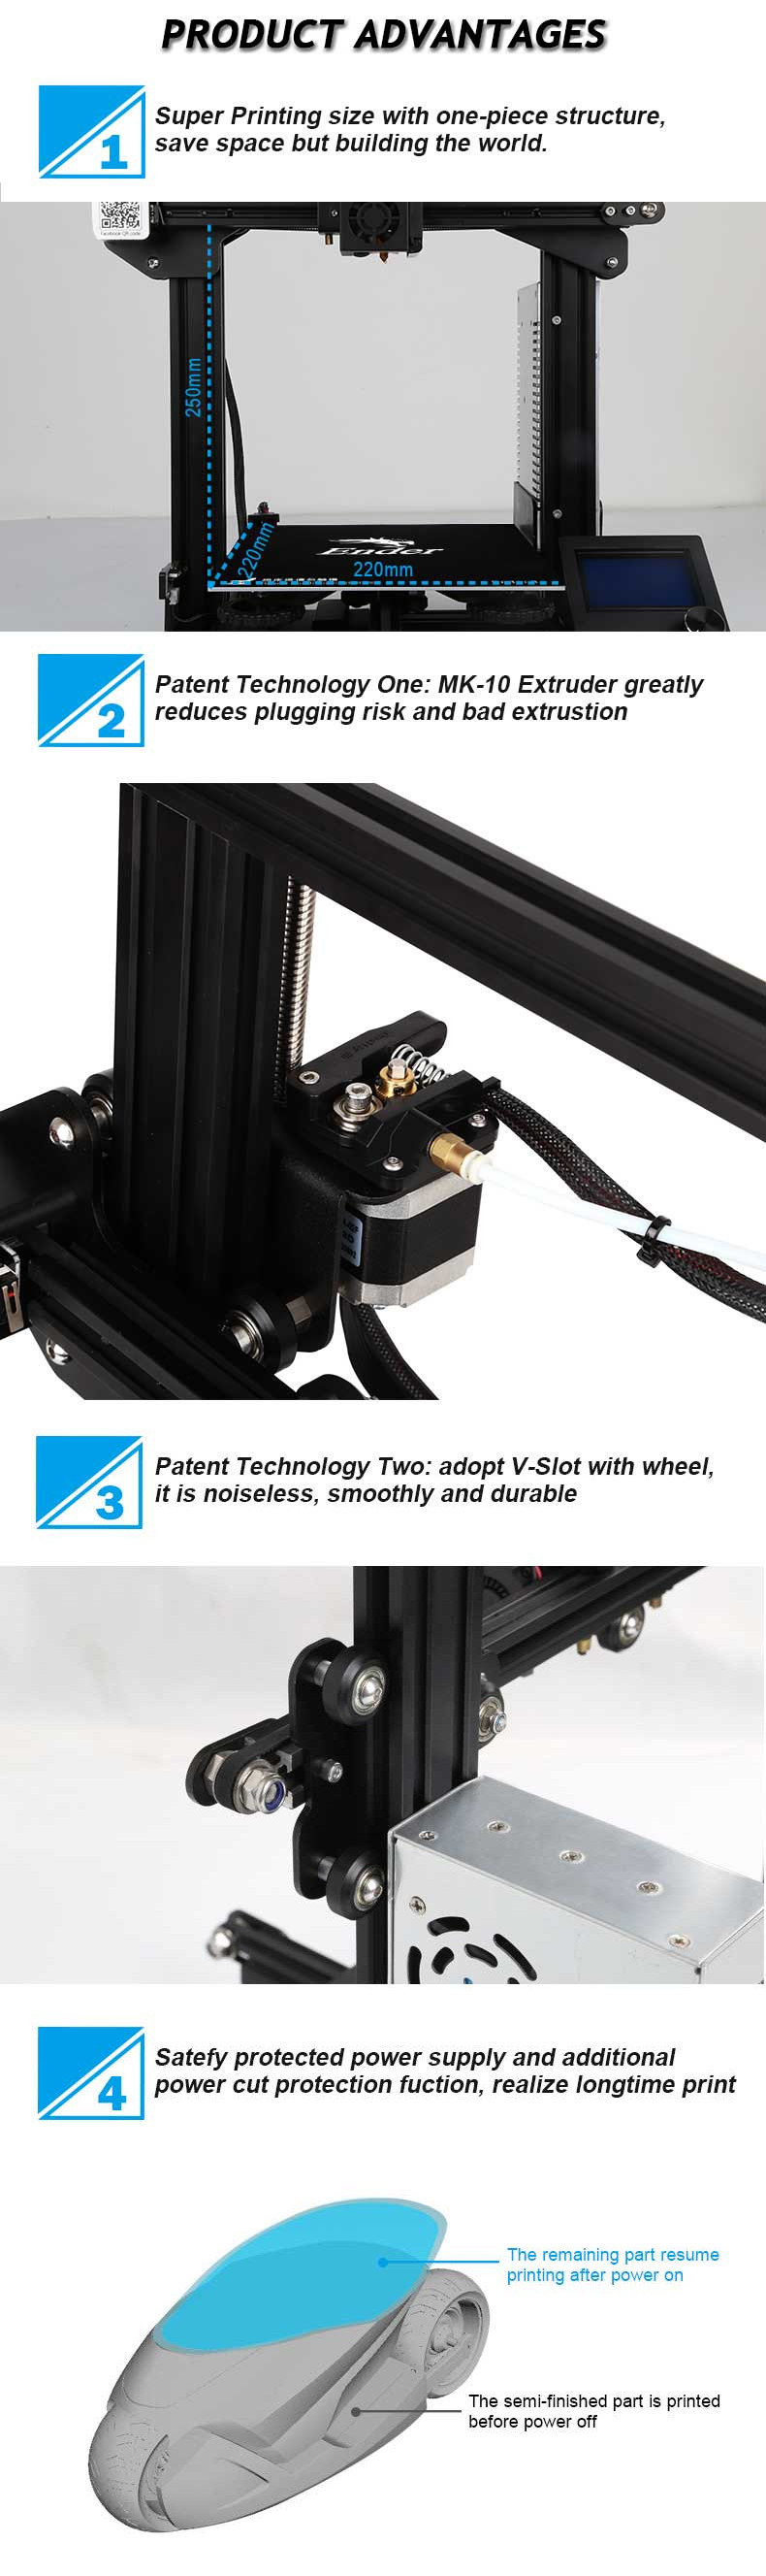 Creality 3D® Ender-3 V-slot Prusa I3 DIY 3D Printer Kit 220x220x250mm Printing Size With Power Resume Function/MK10 Extruder 1.75mm 0.4mm Nozzle 57